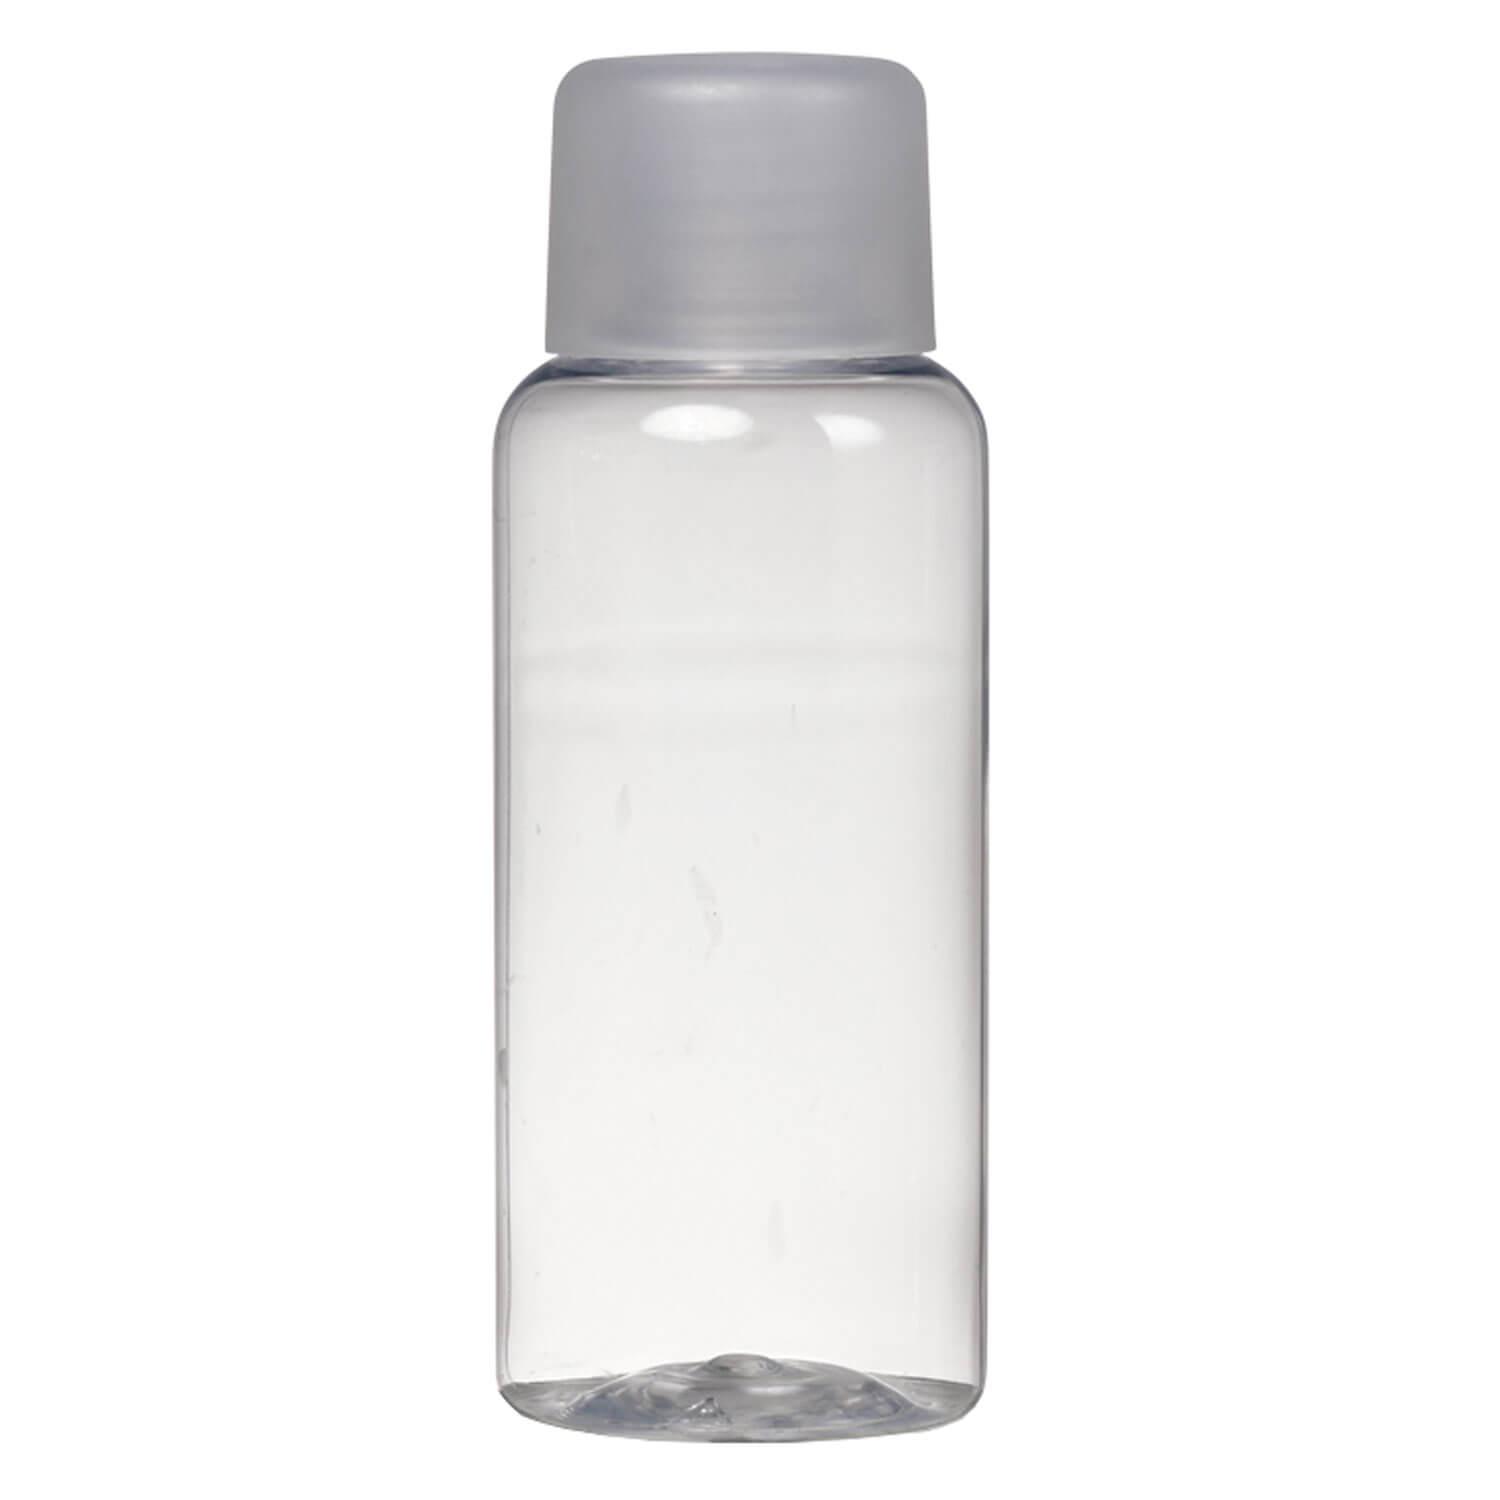 TRISA Travel - Lotionsflasche Gross